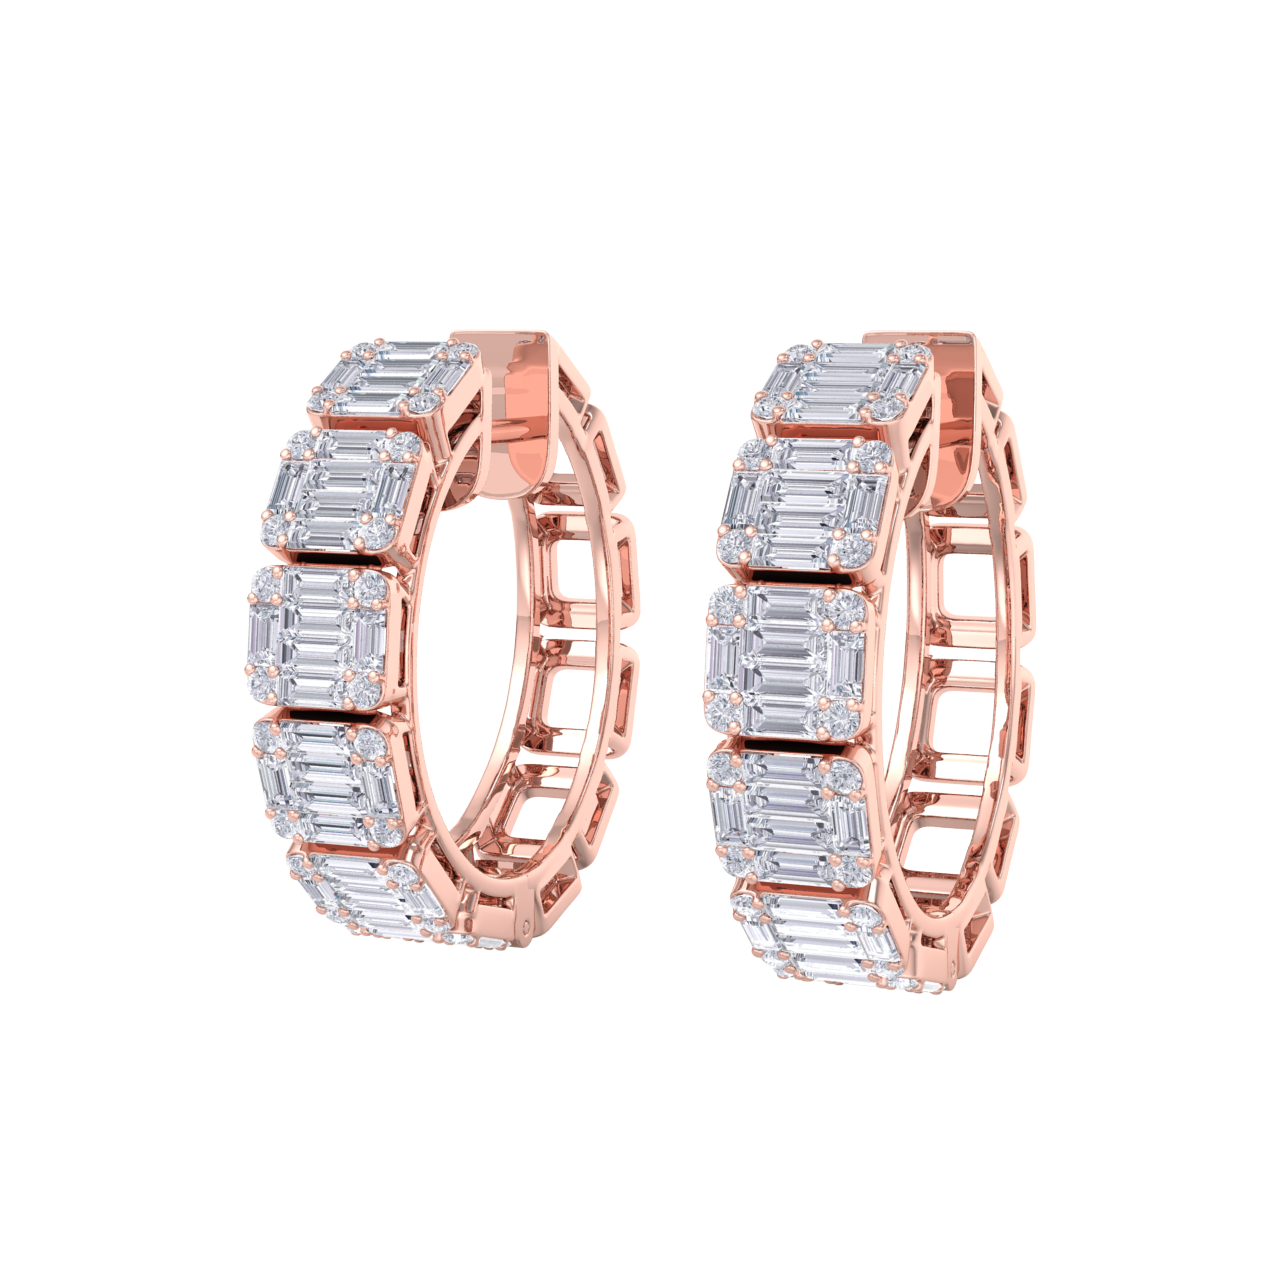 Baguette diamond hoop earrings in rose gold with white diamonds of 4.56 ct in weight